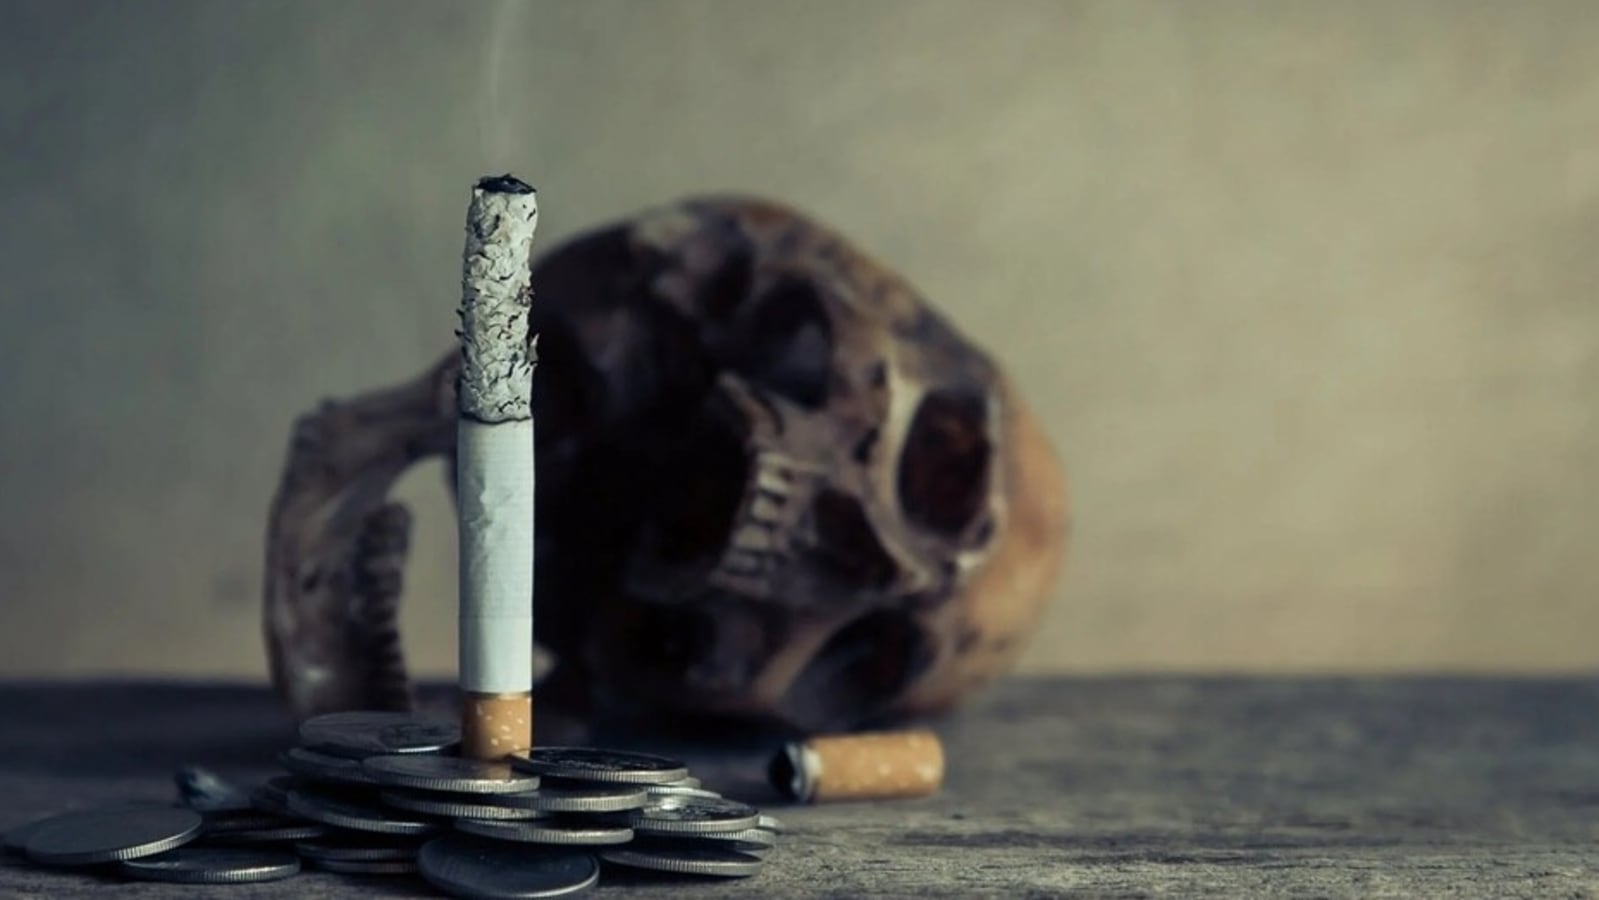 Smoking Cessation Day 2022: 5 Easy Trainings to Help You Quit Smoking | Health